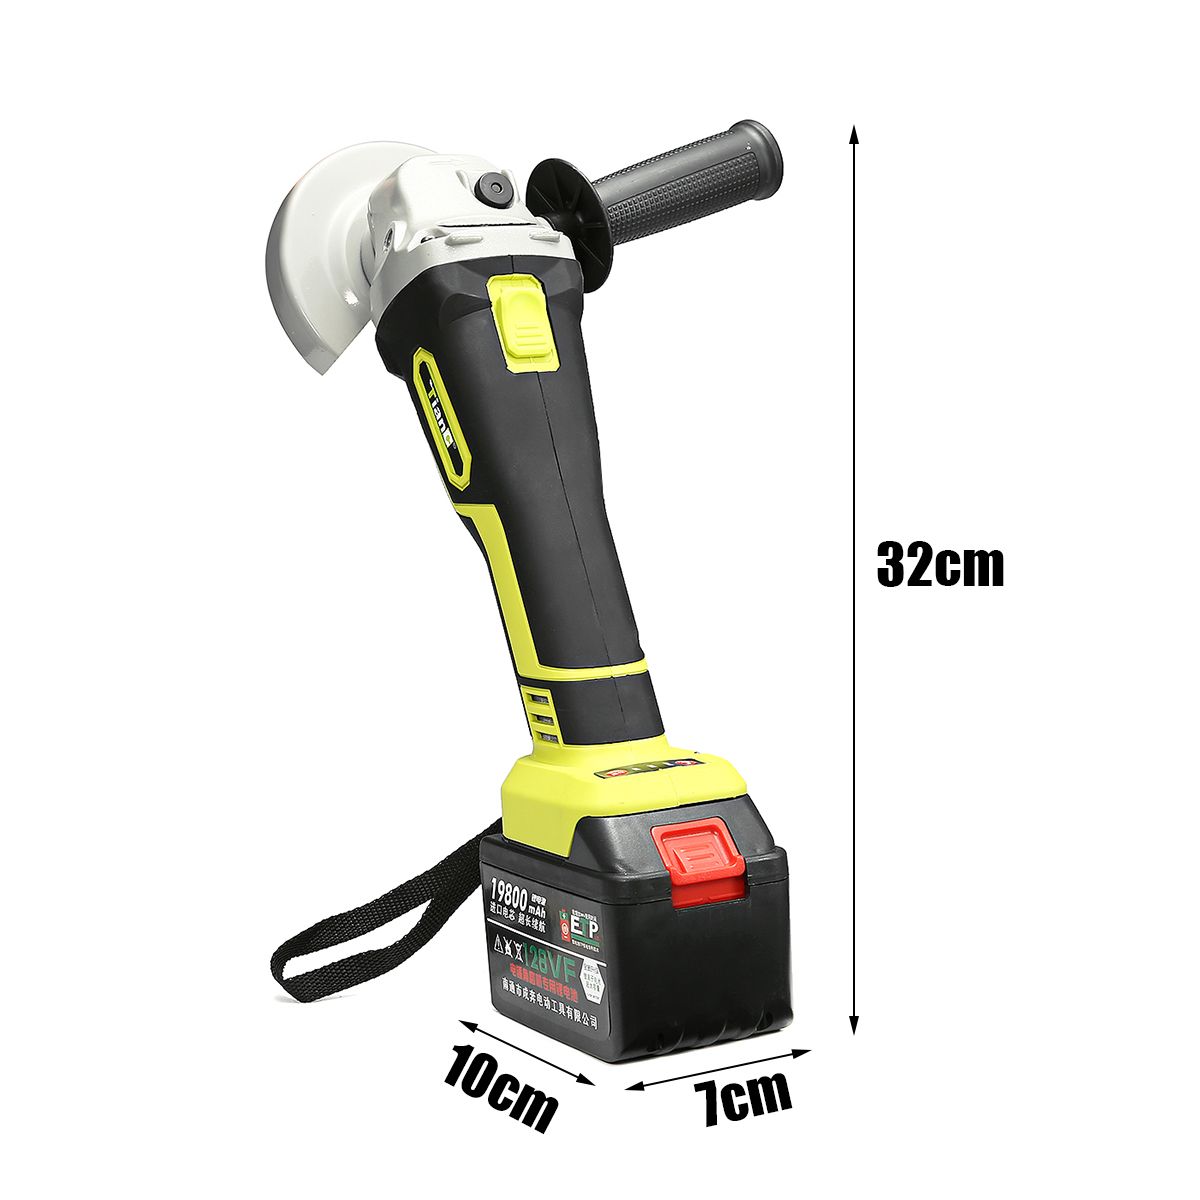 128VF-19800mAh-Lithium-Ion-Brushless-Cut-Off-Angle-Grinder-Cordless-Electric-Angle-Grinder-Power-Cut-1397283